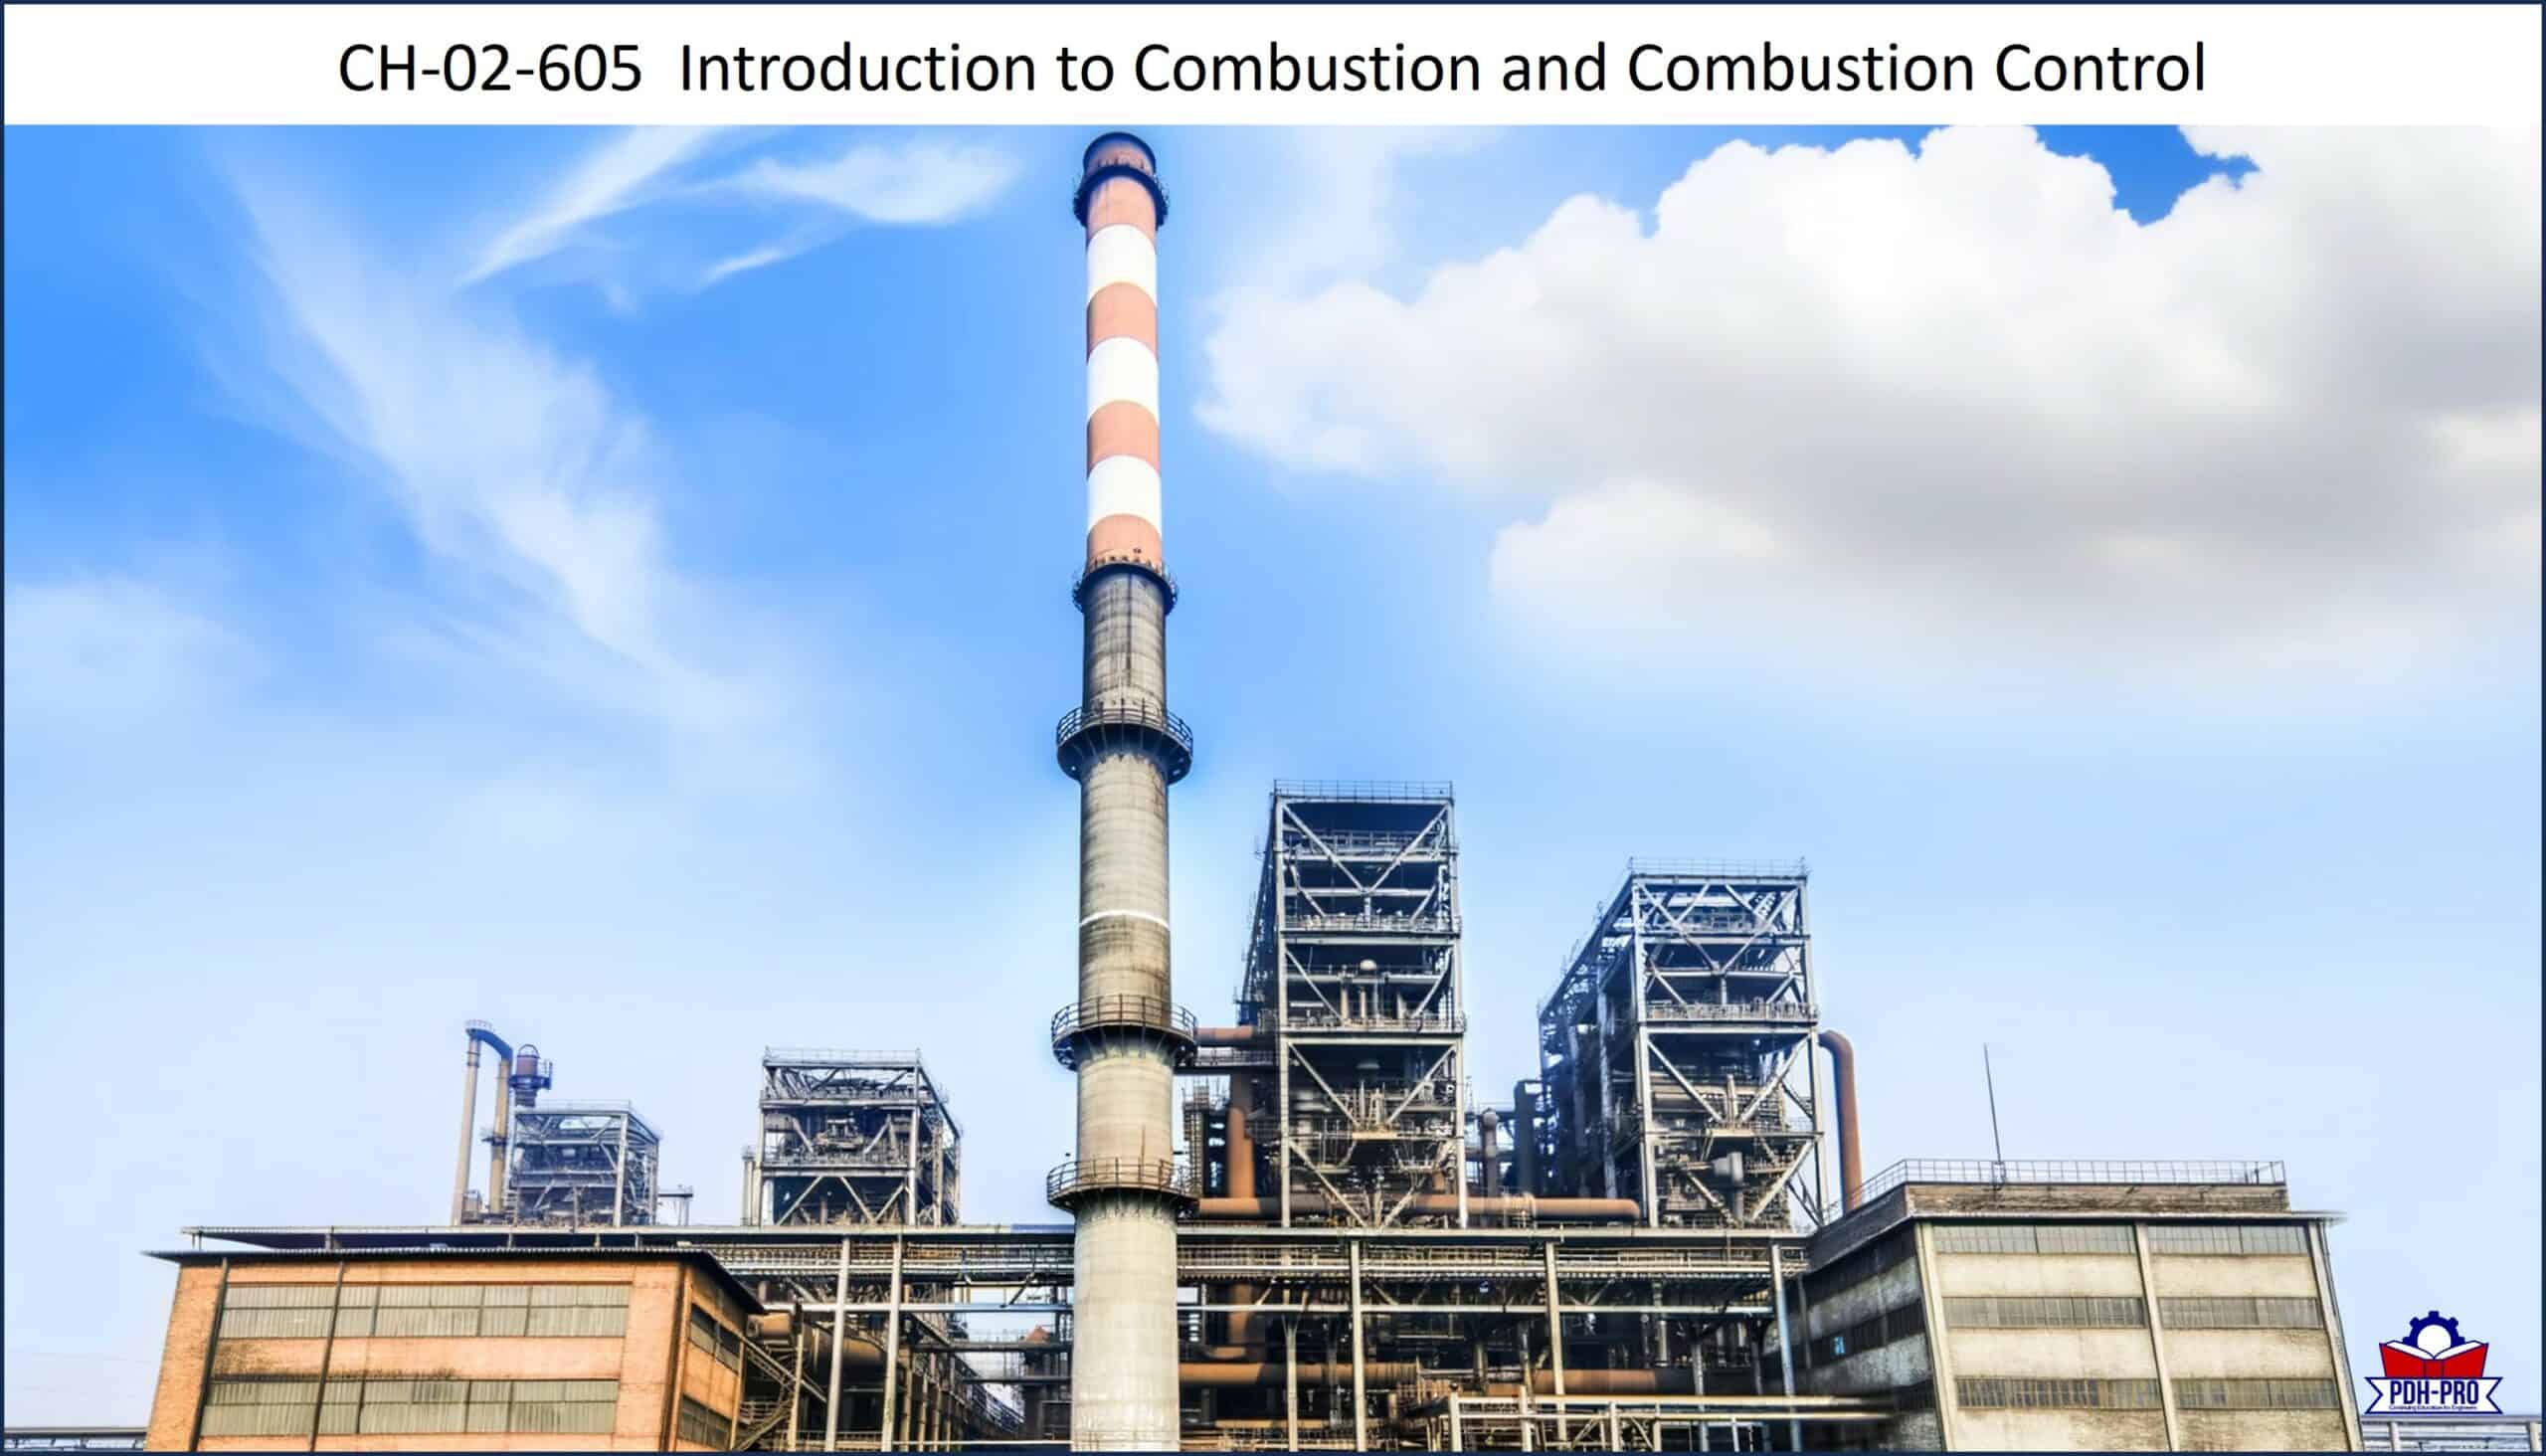 Introduction to Combustion and Combustion Control